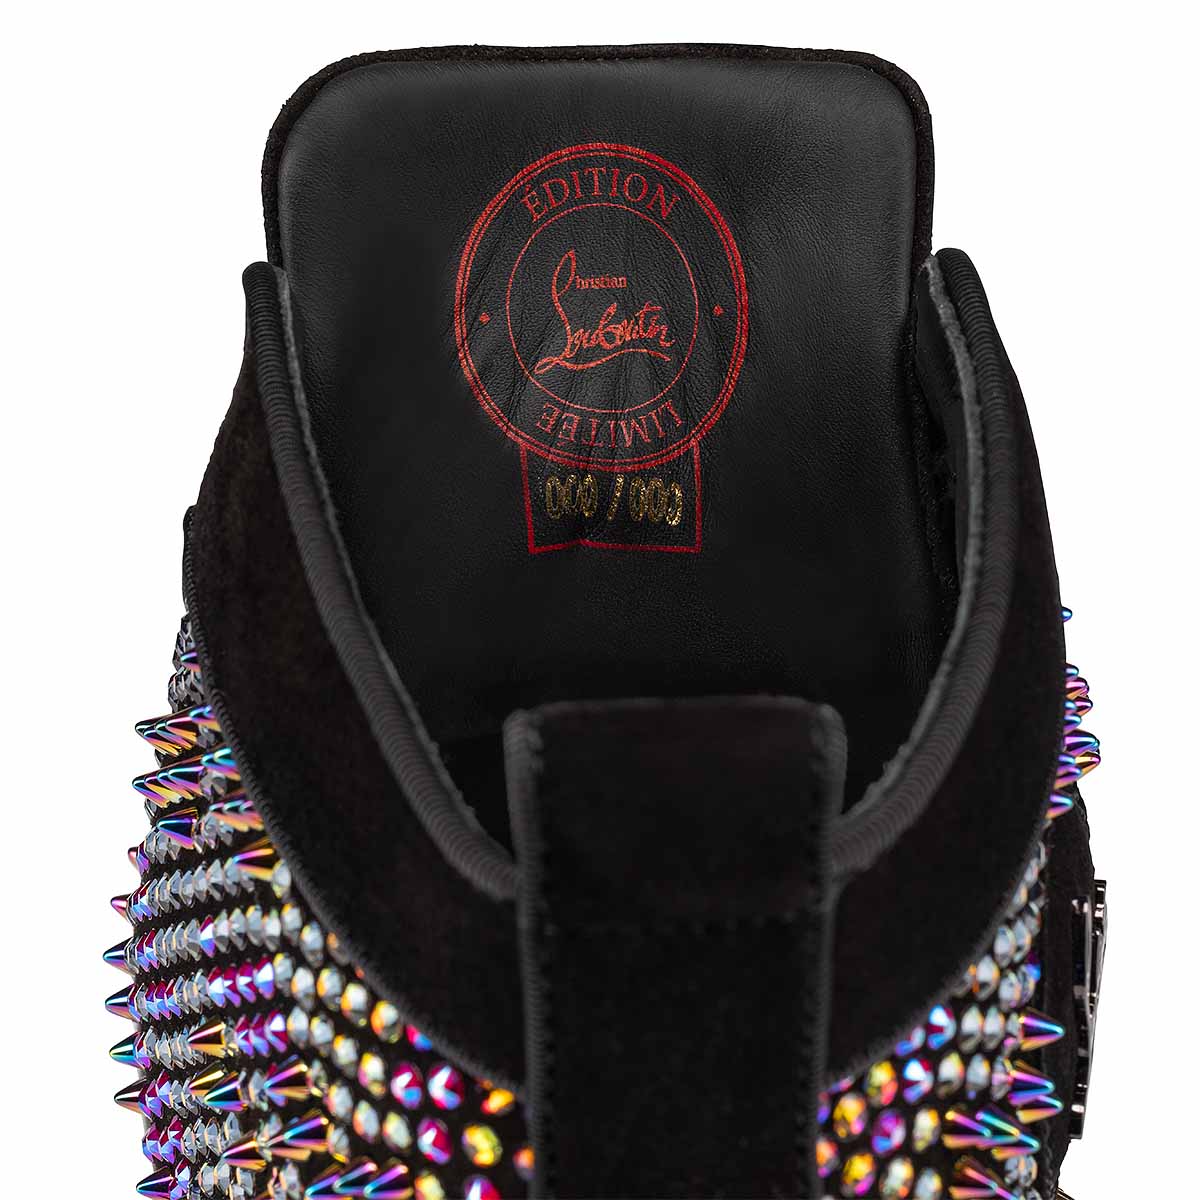 chaussures christian louboutin louis strass 42.5